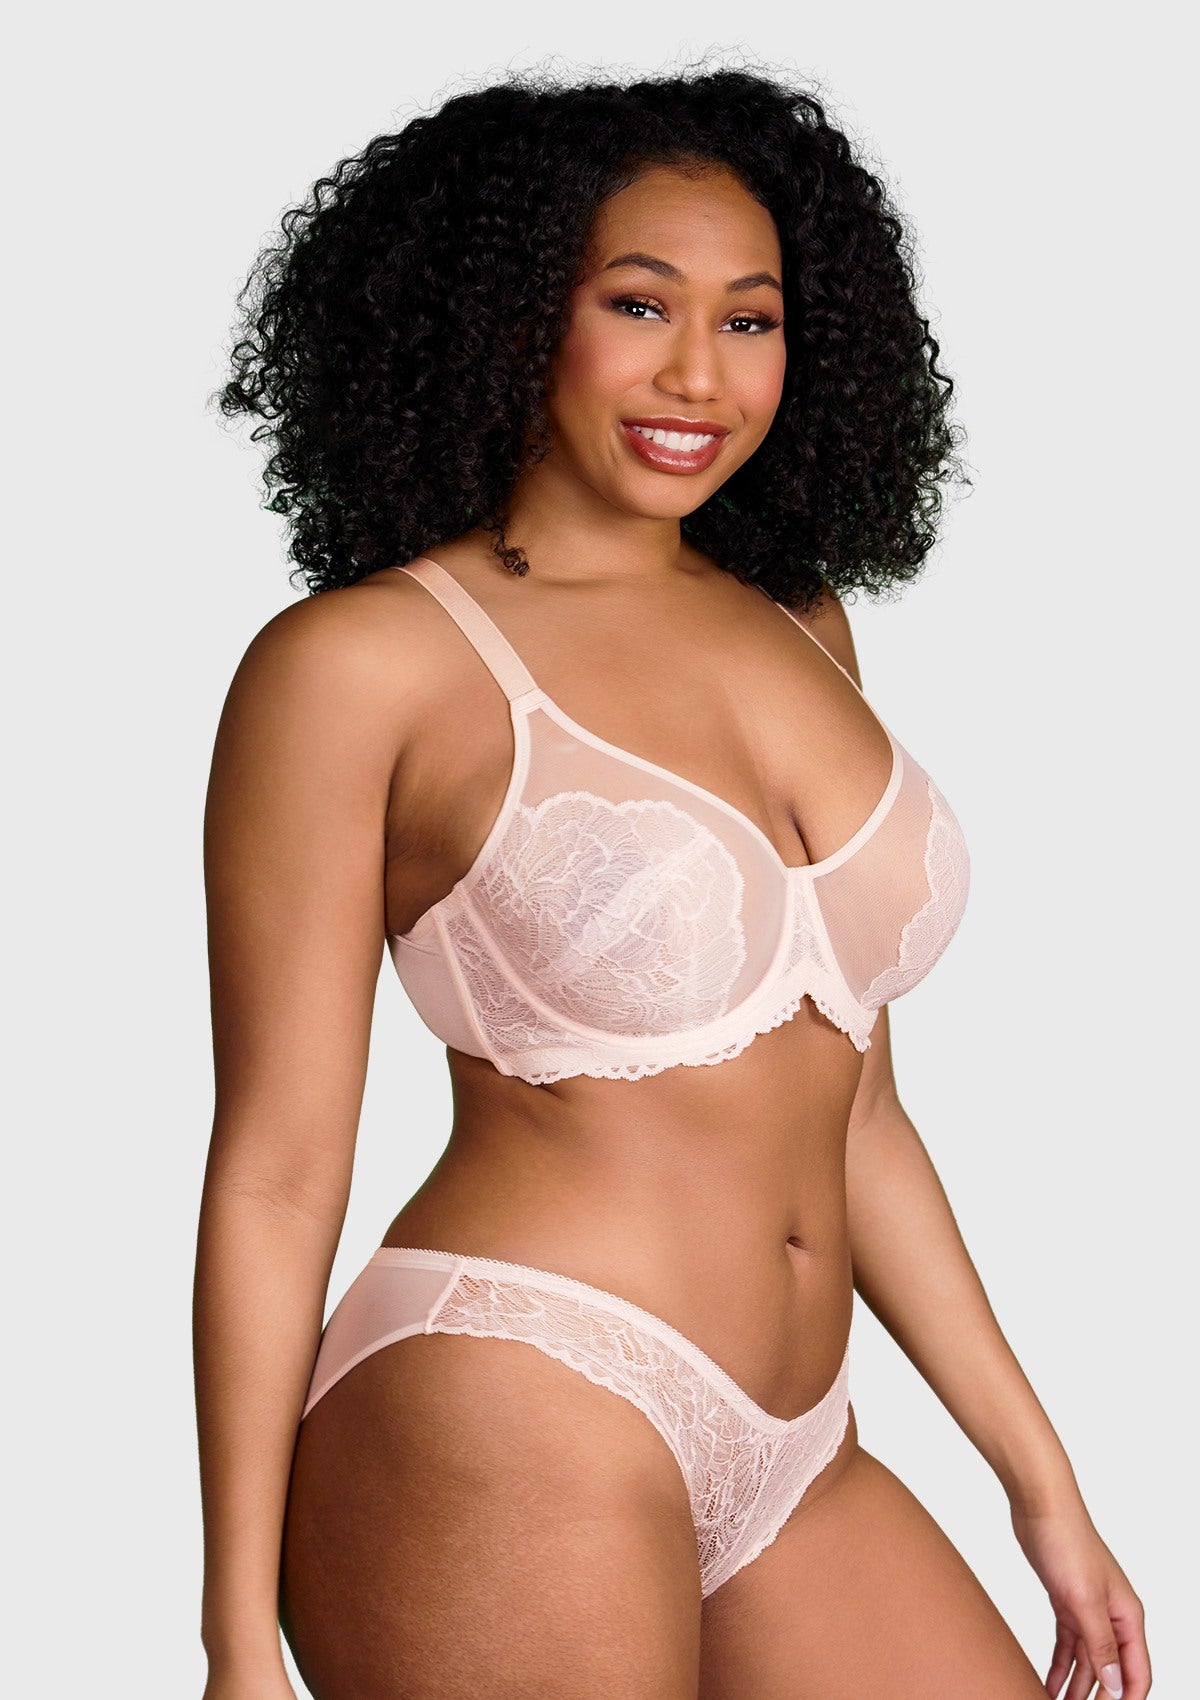 HSIA Blossom Sheer Lace Bra: Comfortable Underwire Bra For Big Busts - Dusty Peach / 34 / D